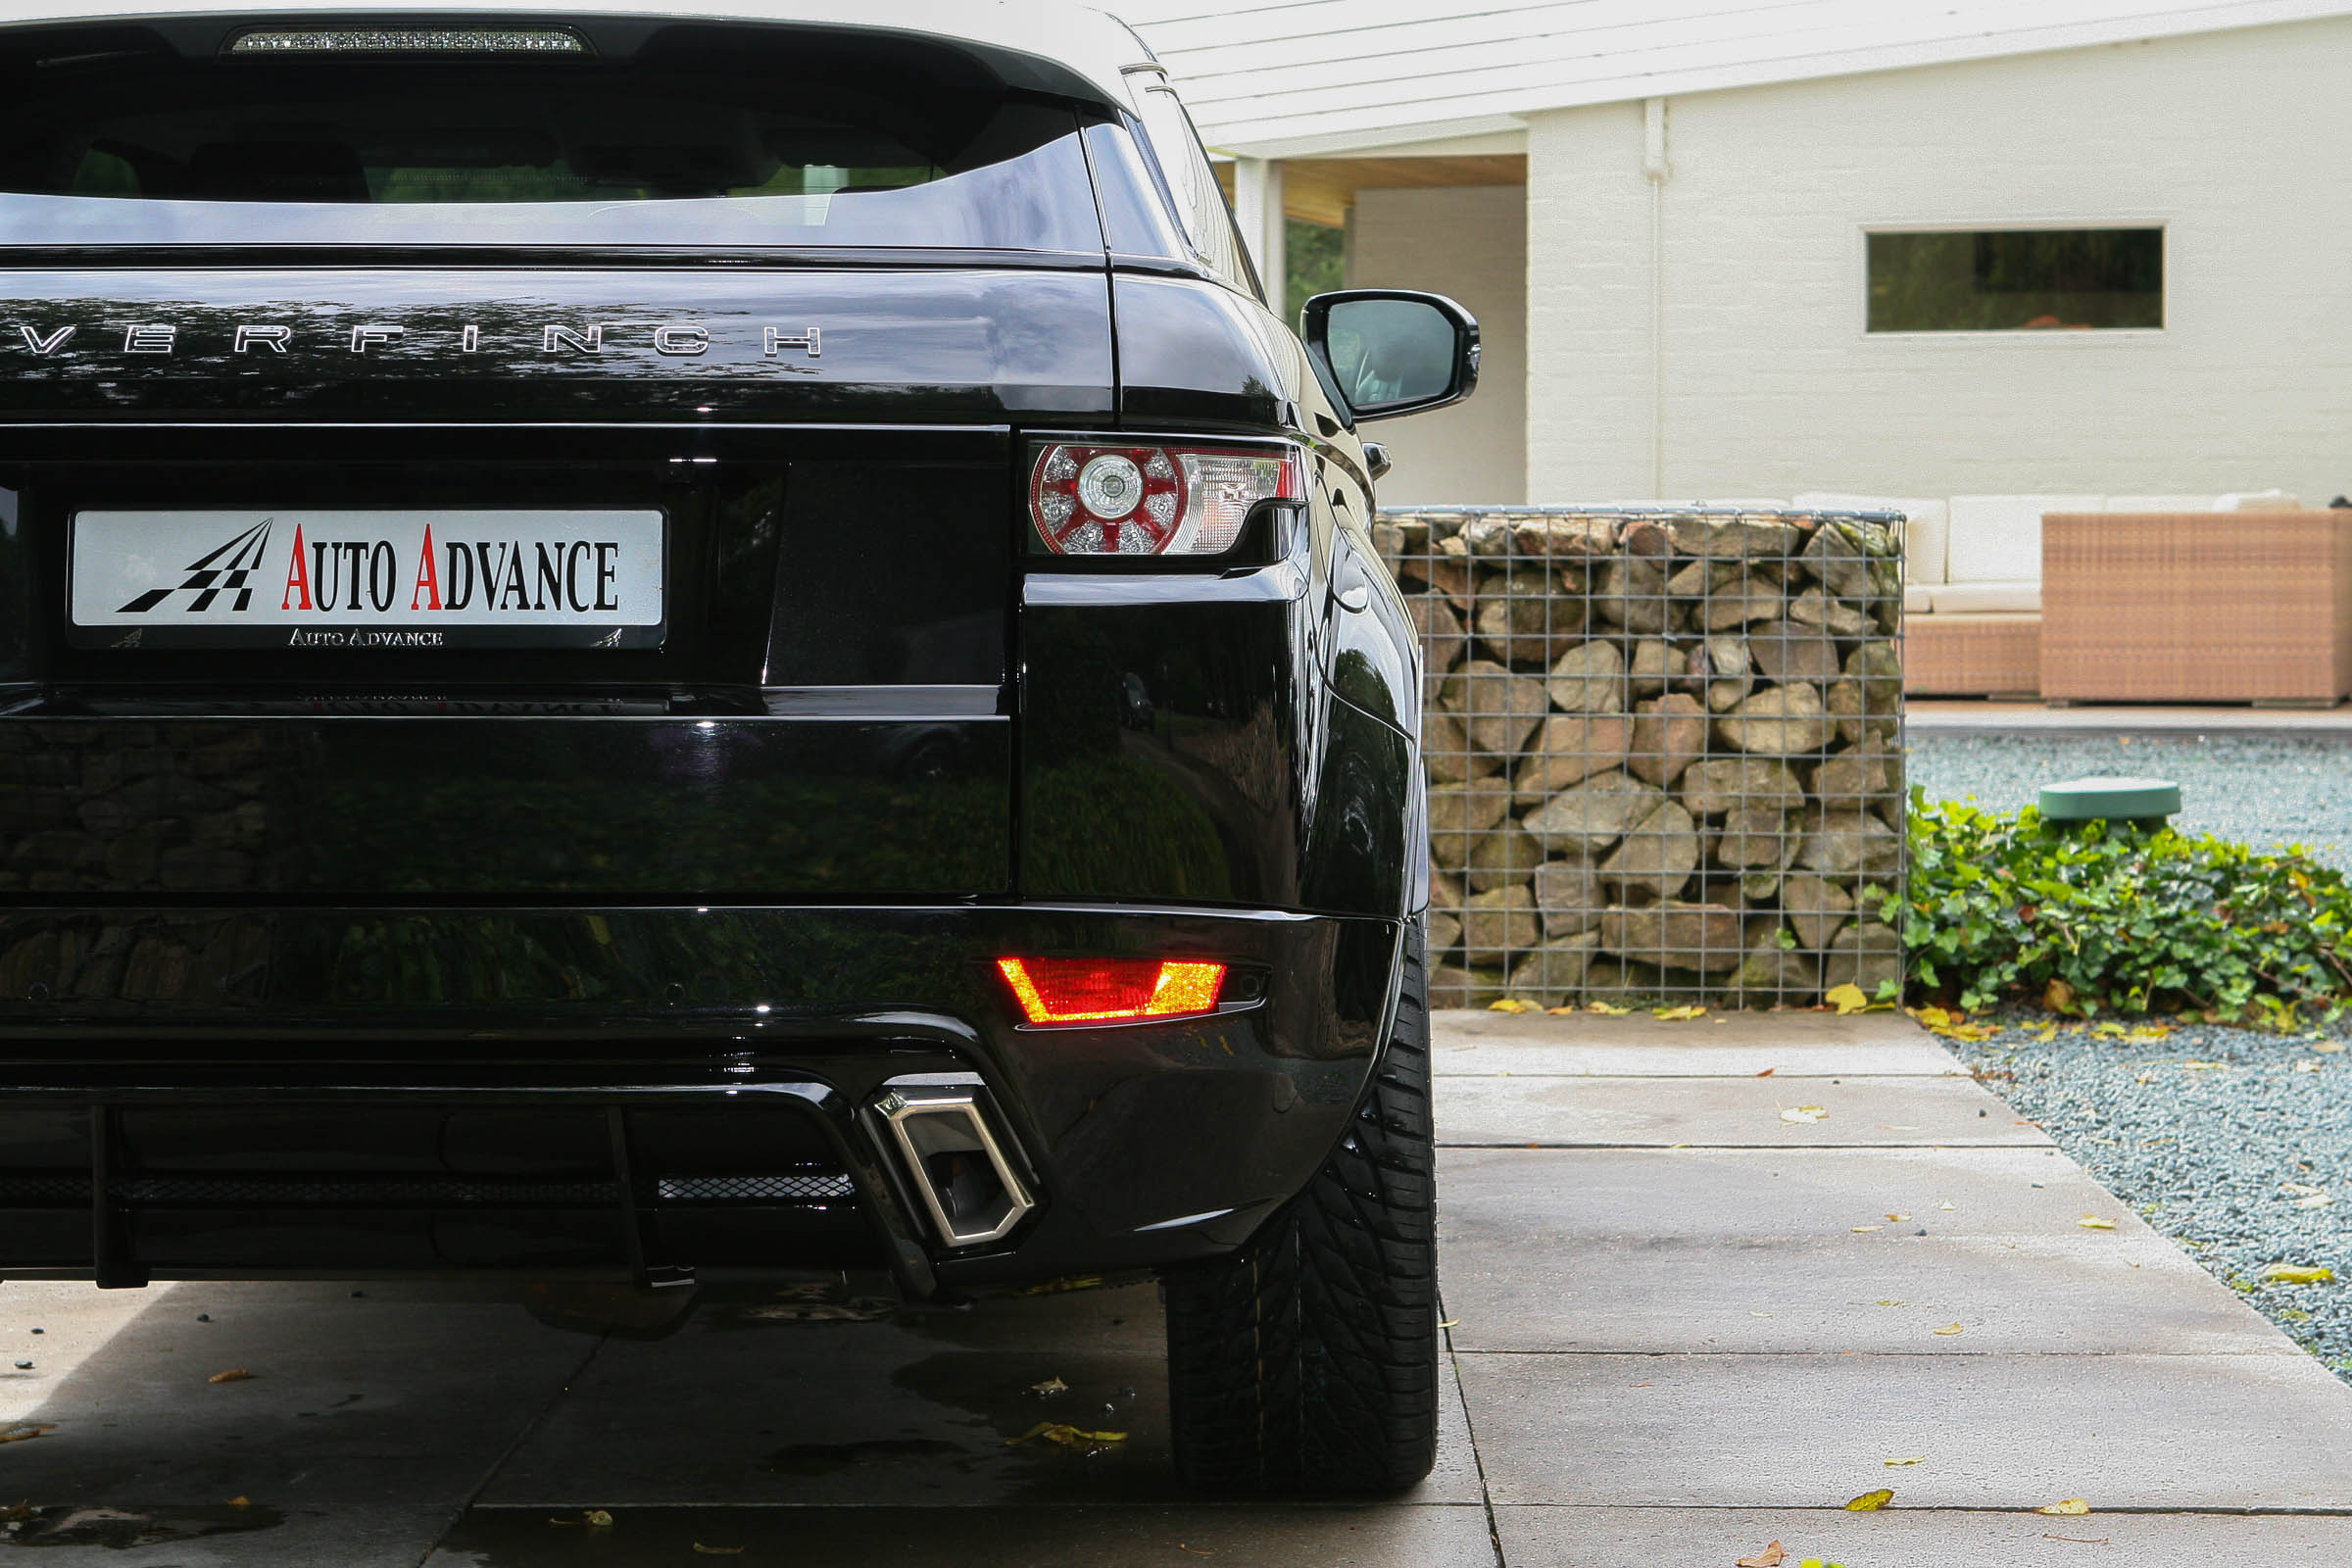 Range Rover Evoque Overfinch GTS Coupe